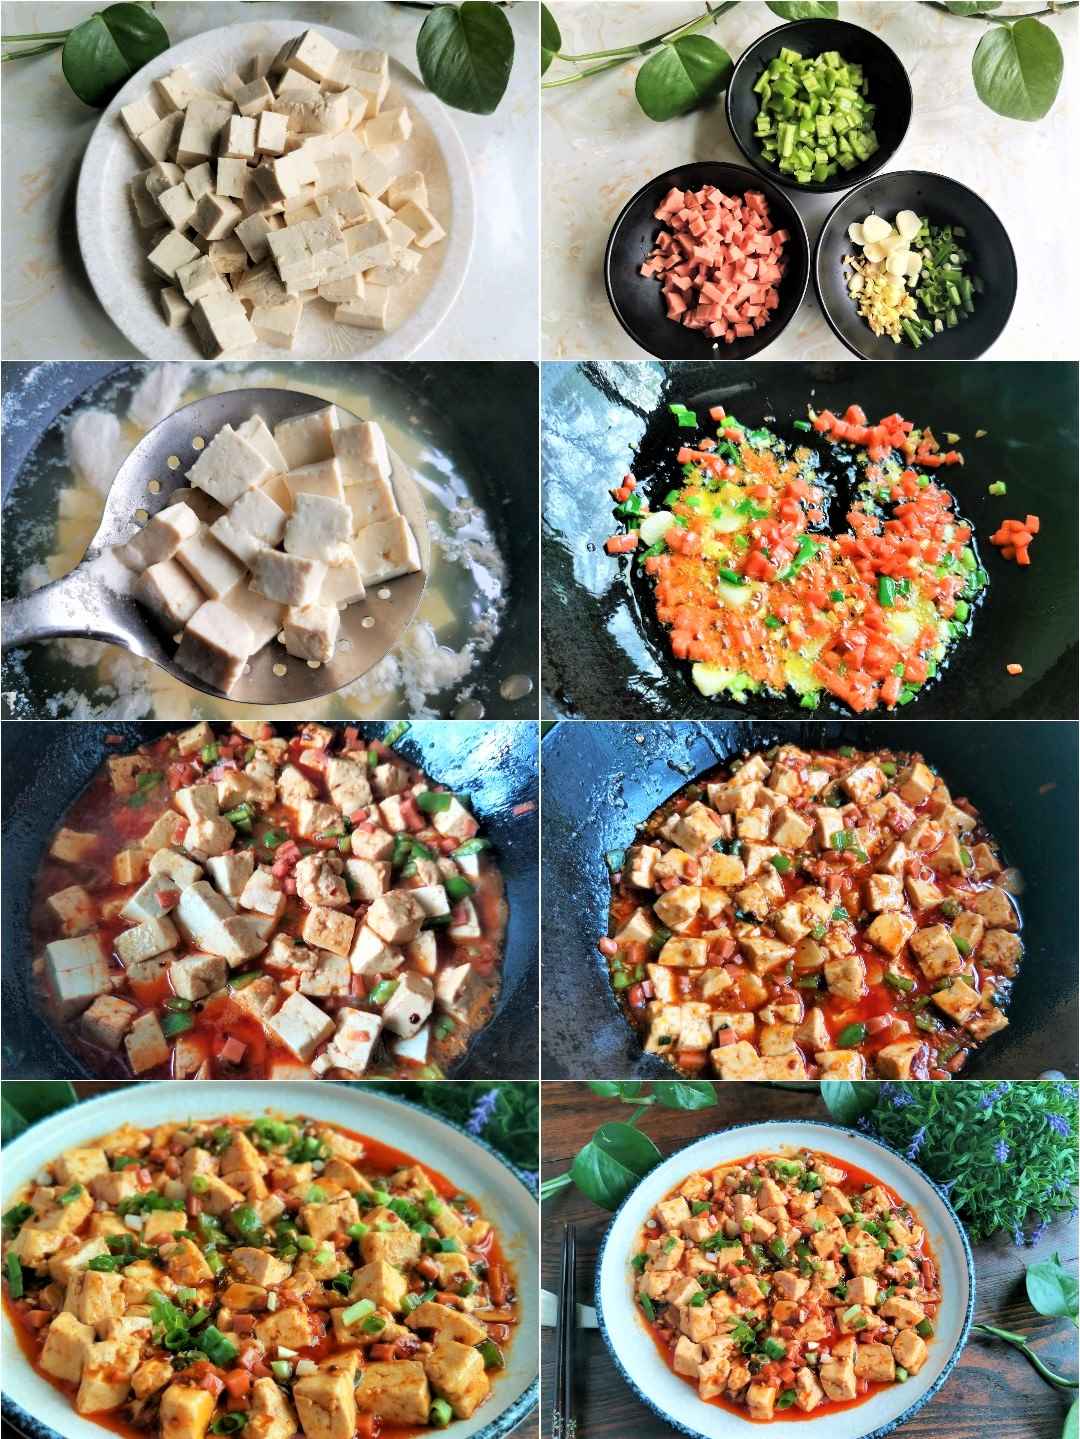 Picture steps for how to cook Chinese tofu recipes